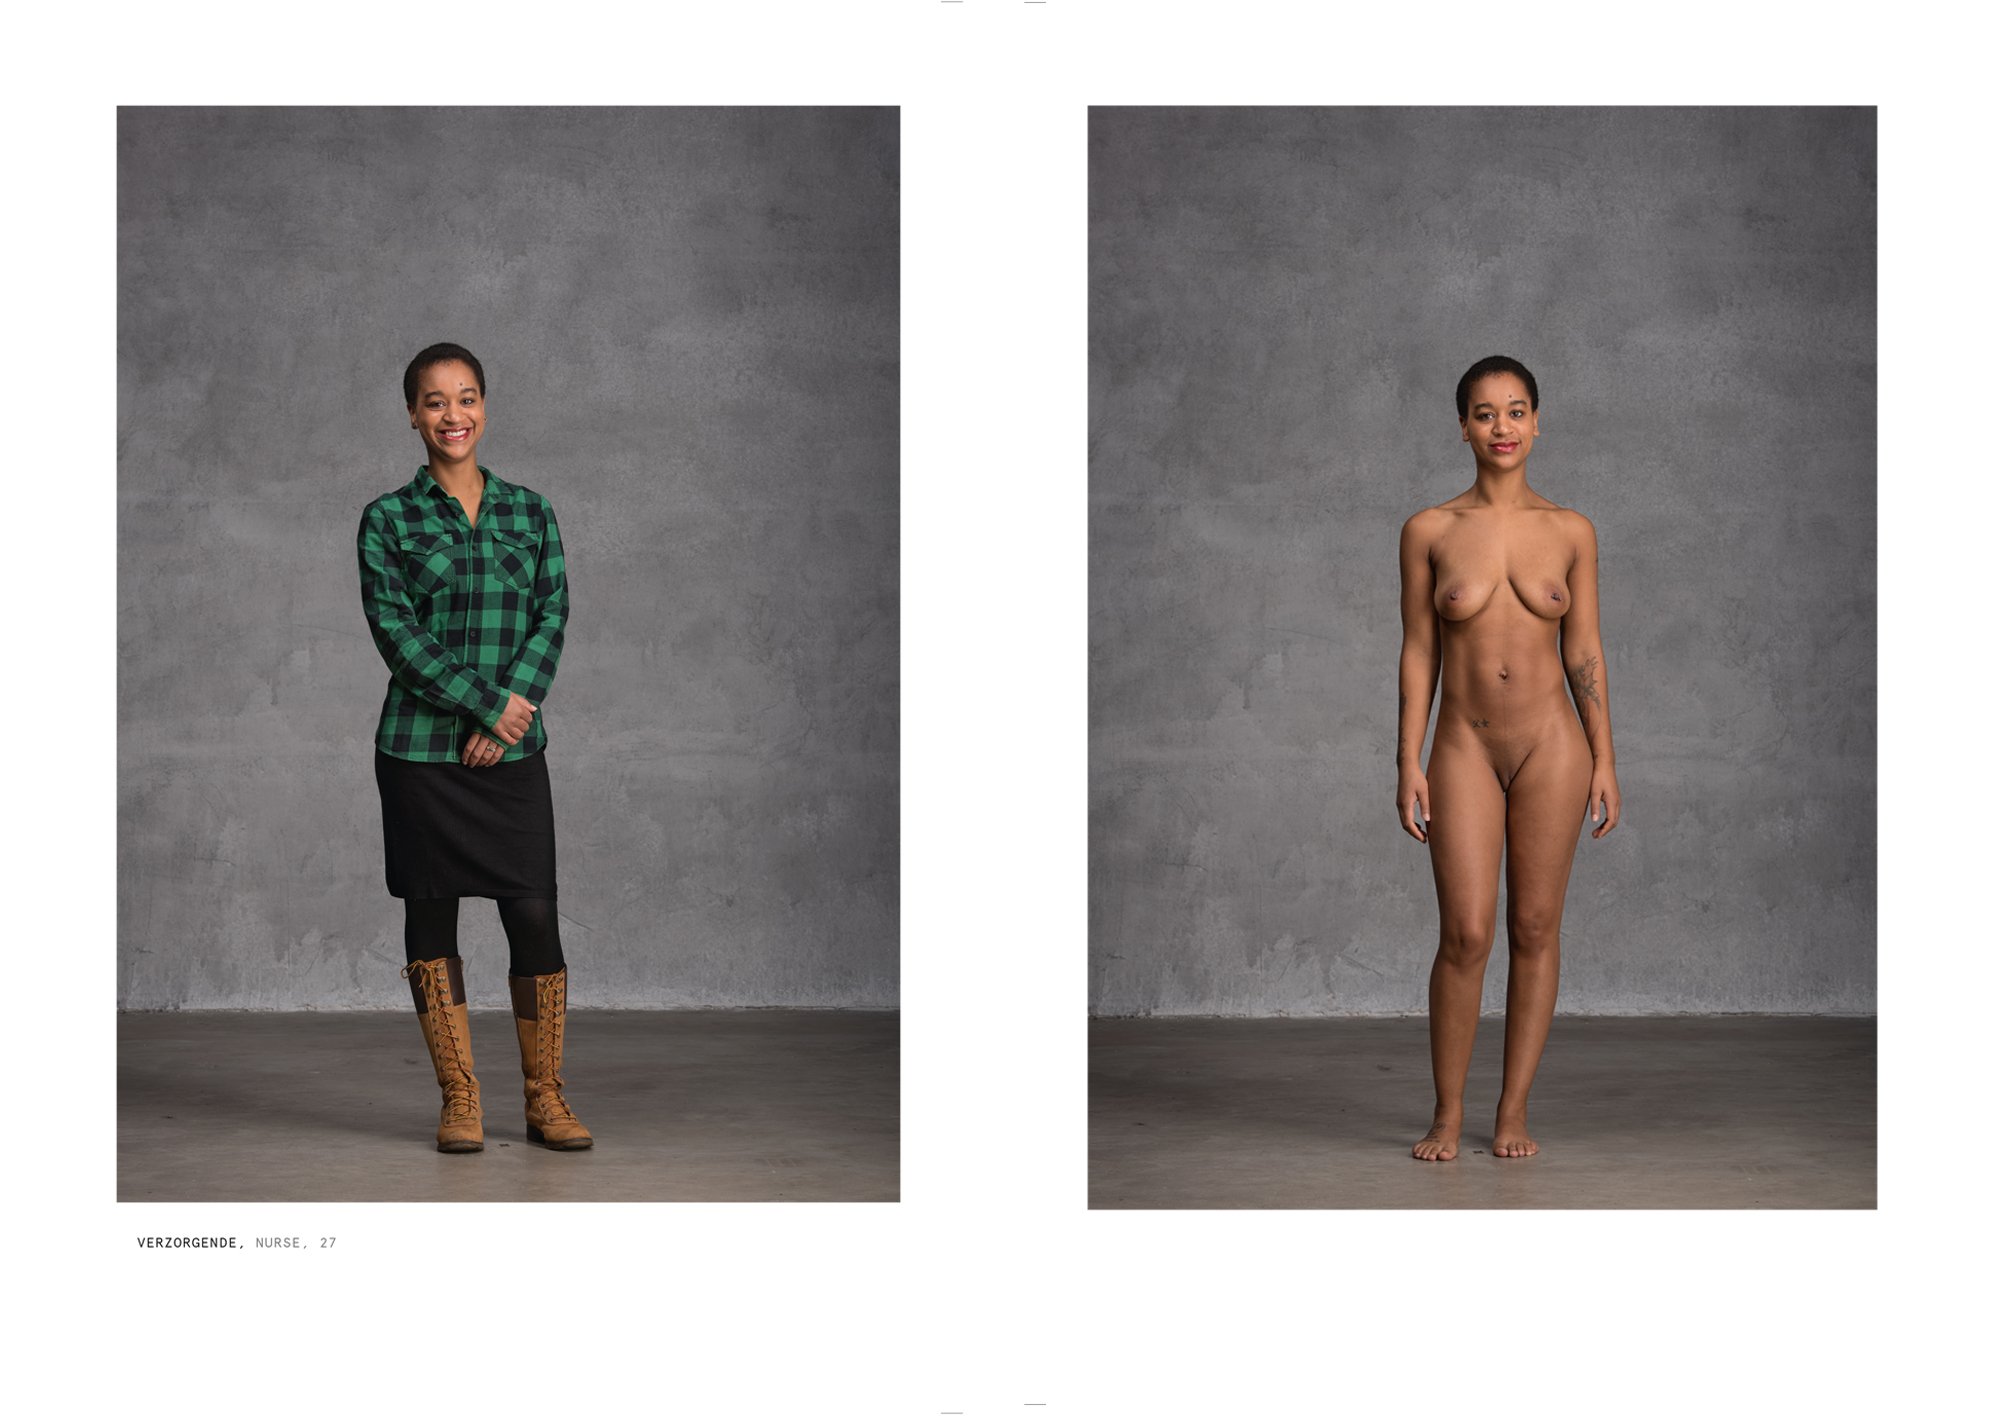 Ordinary people clothed and nude